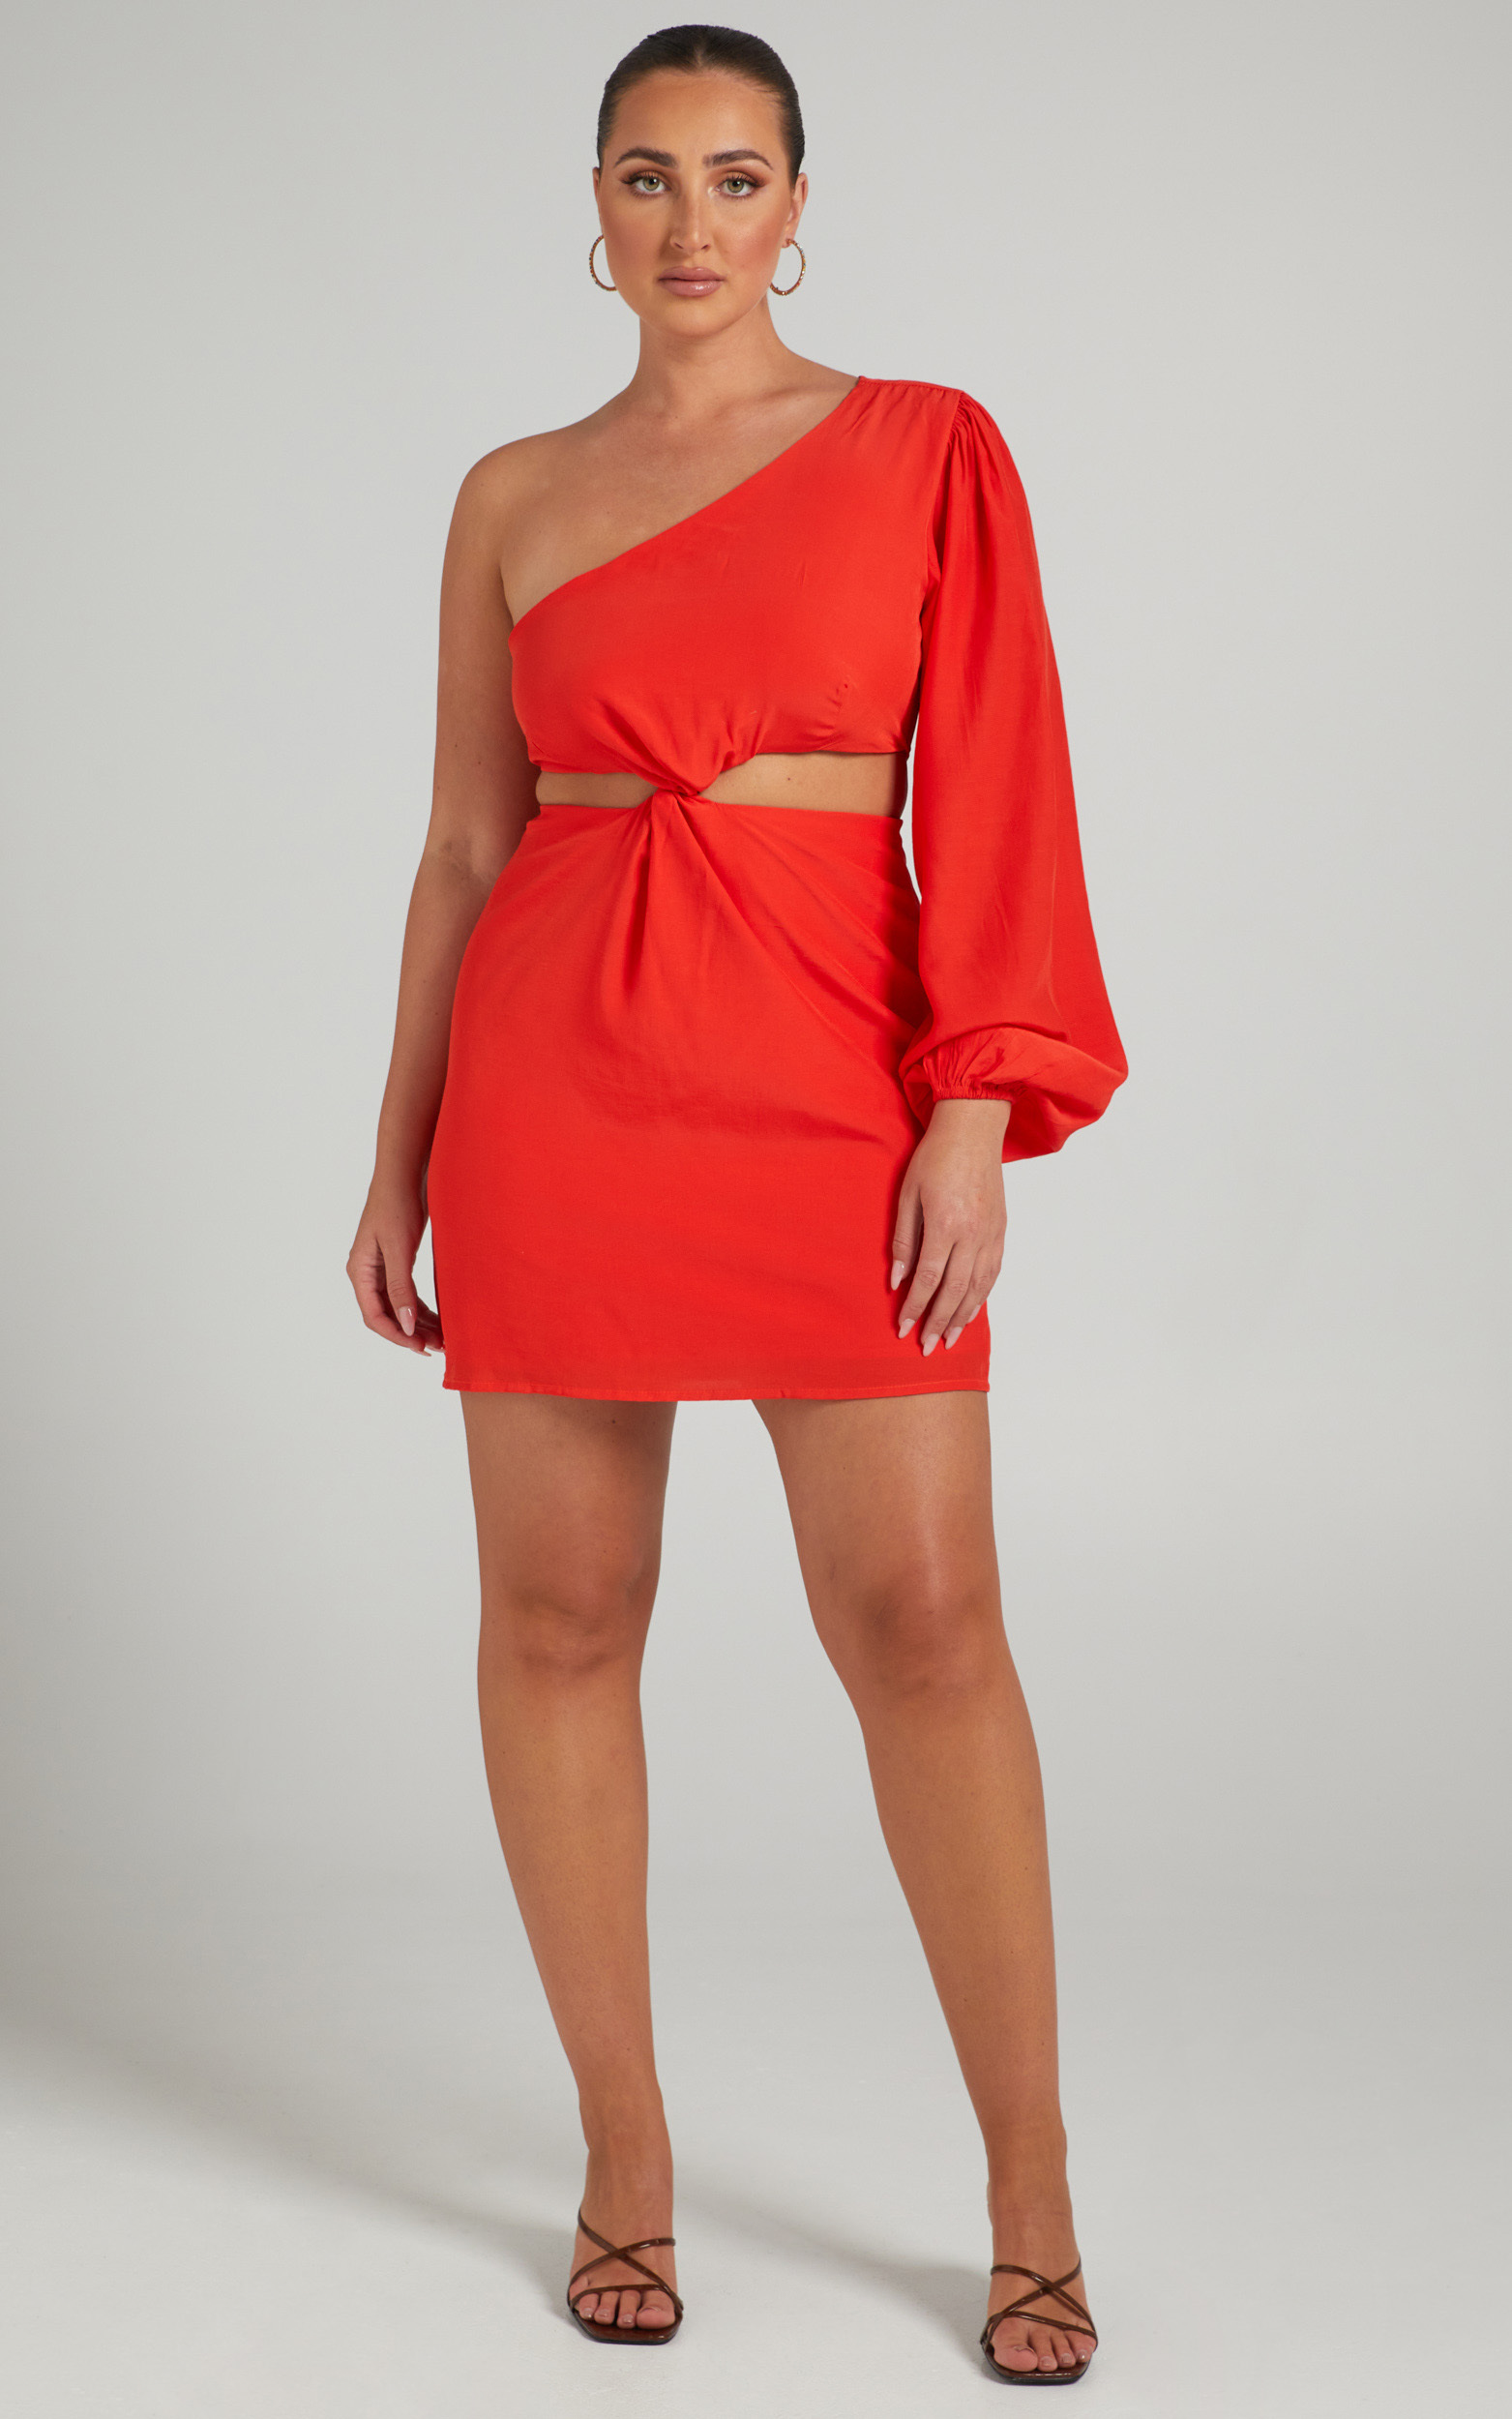 Glannica One Shoulder Mini Dress with Twist Front in Red - 06, RED2, hi-res image number null